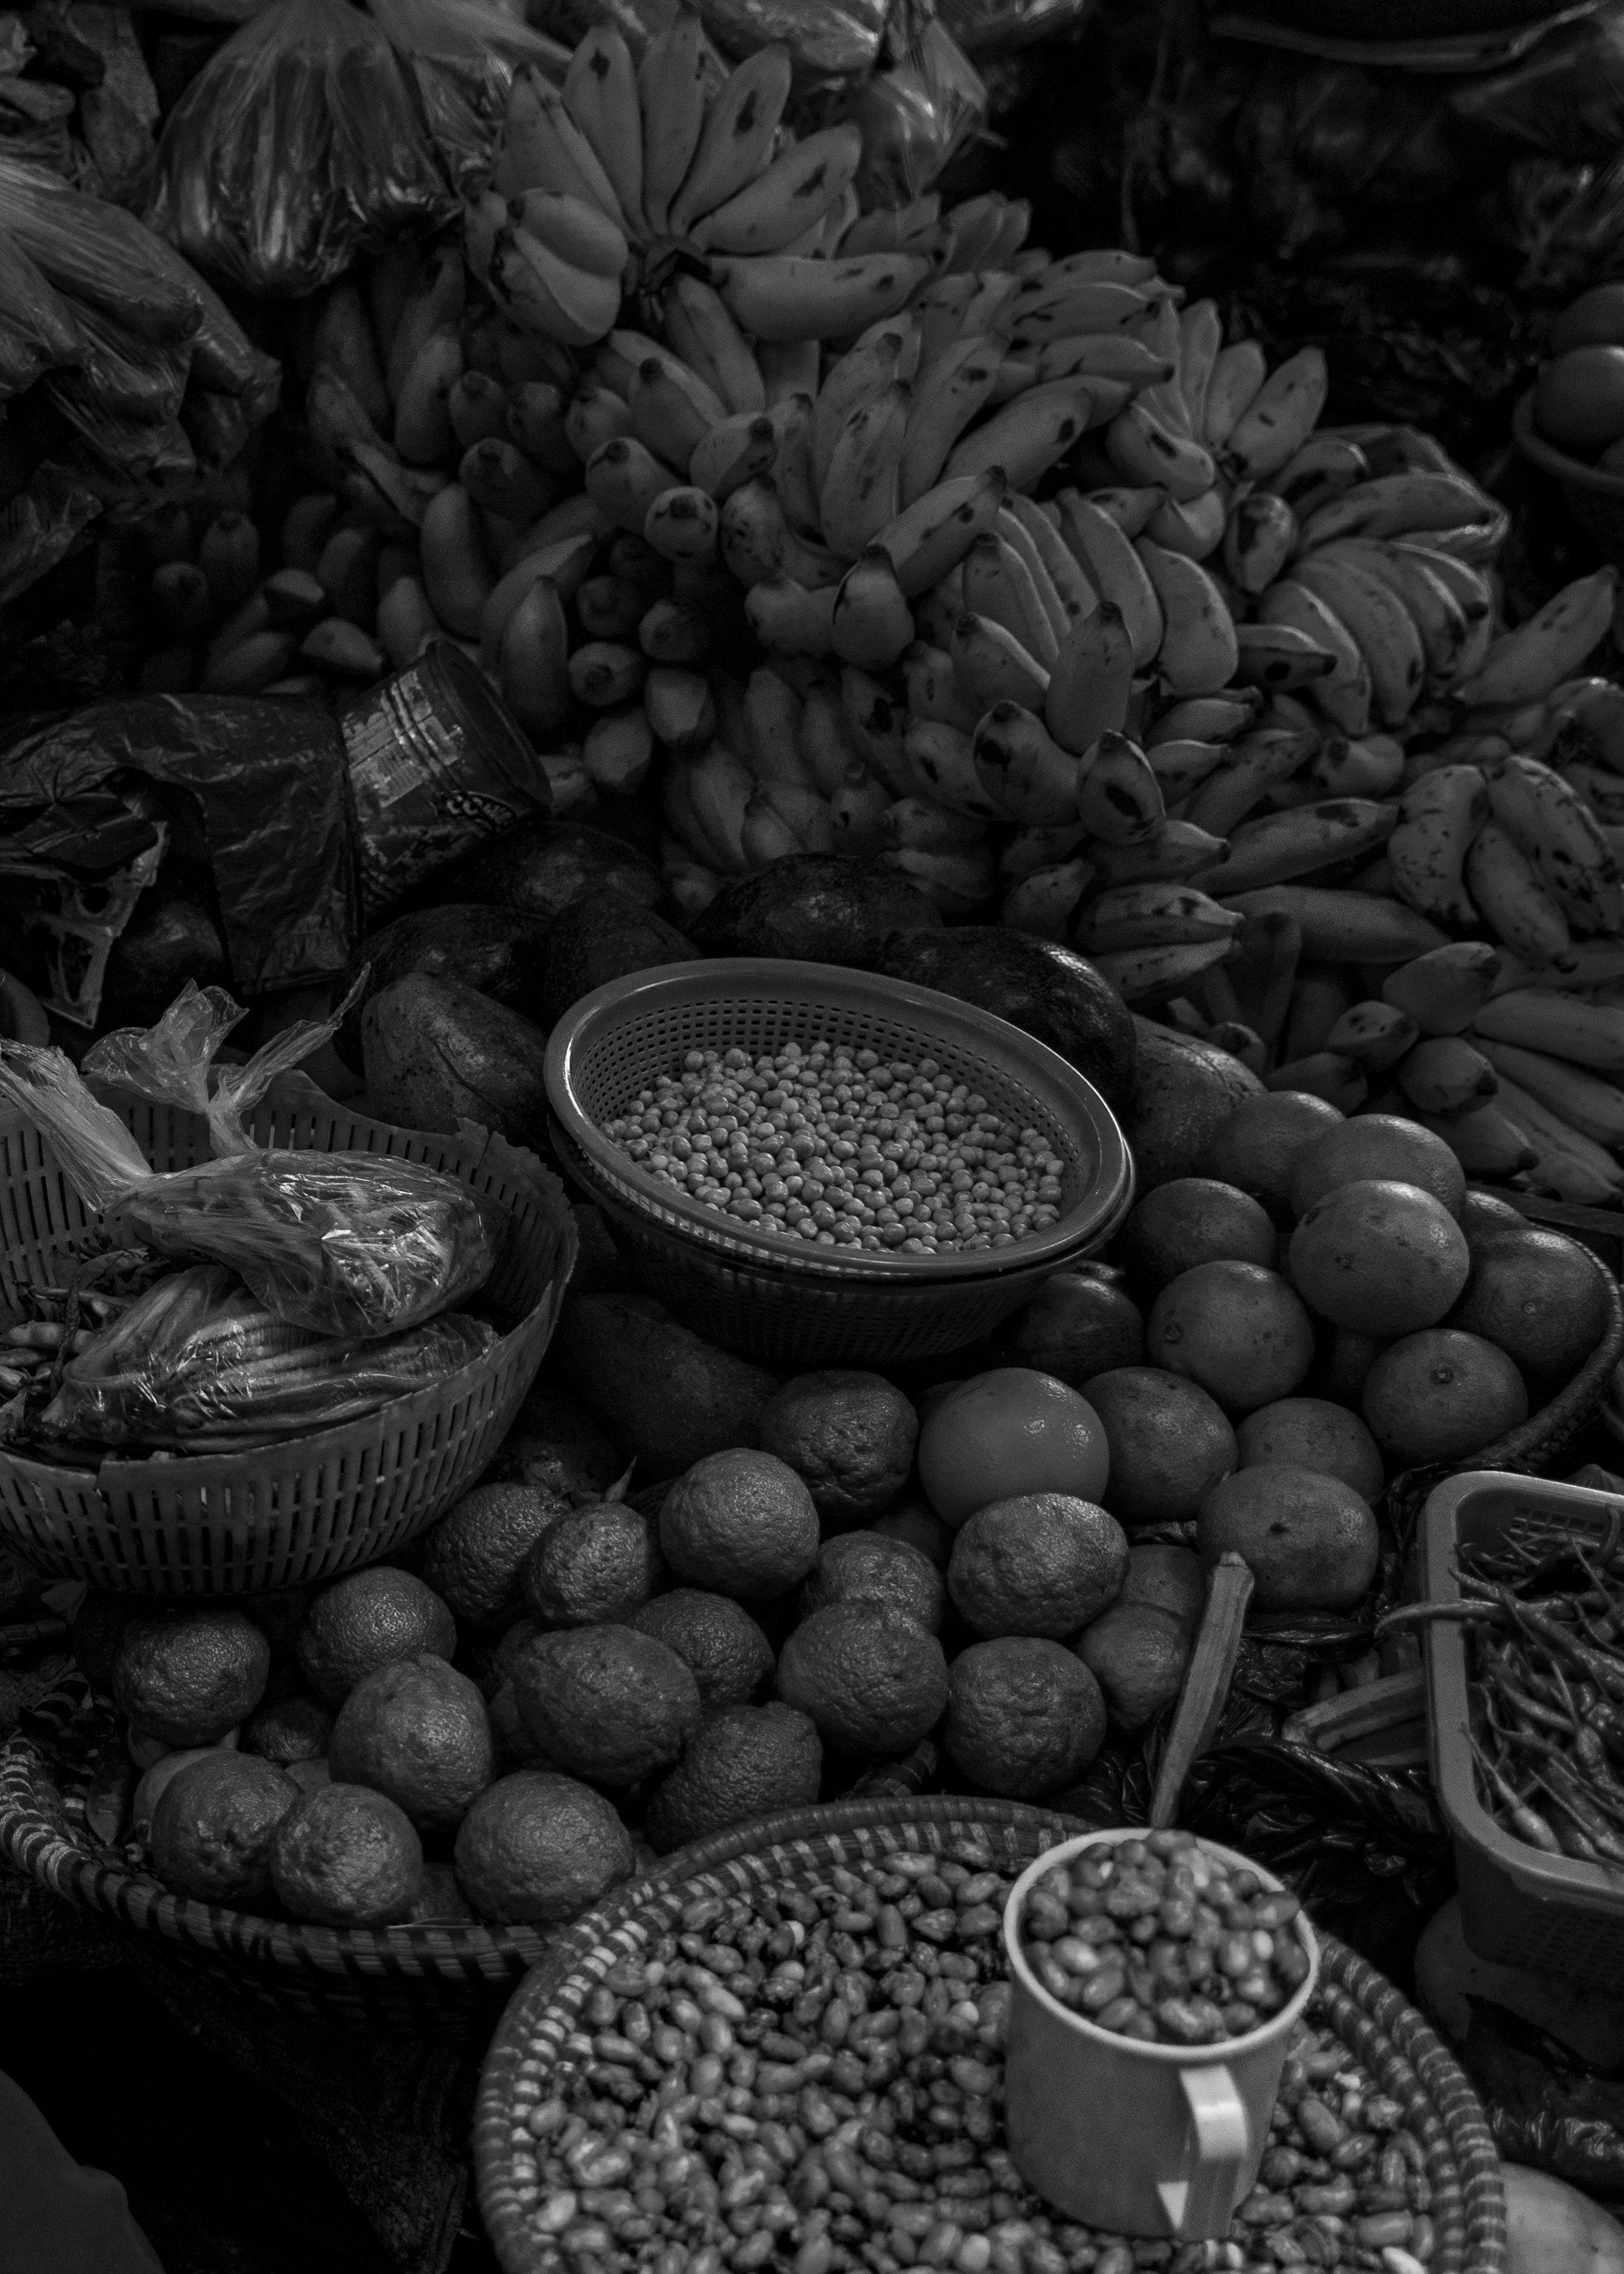 Fruit and vegetables at the Bugolobi Market in Kampala BW.jpg